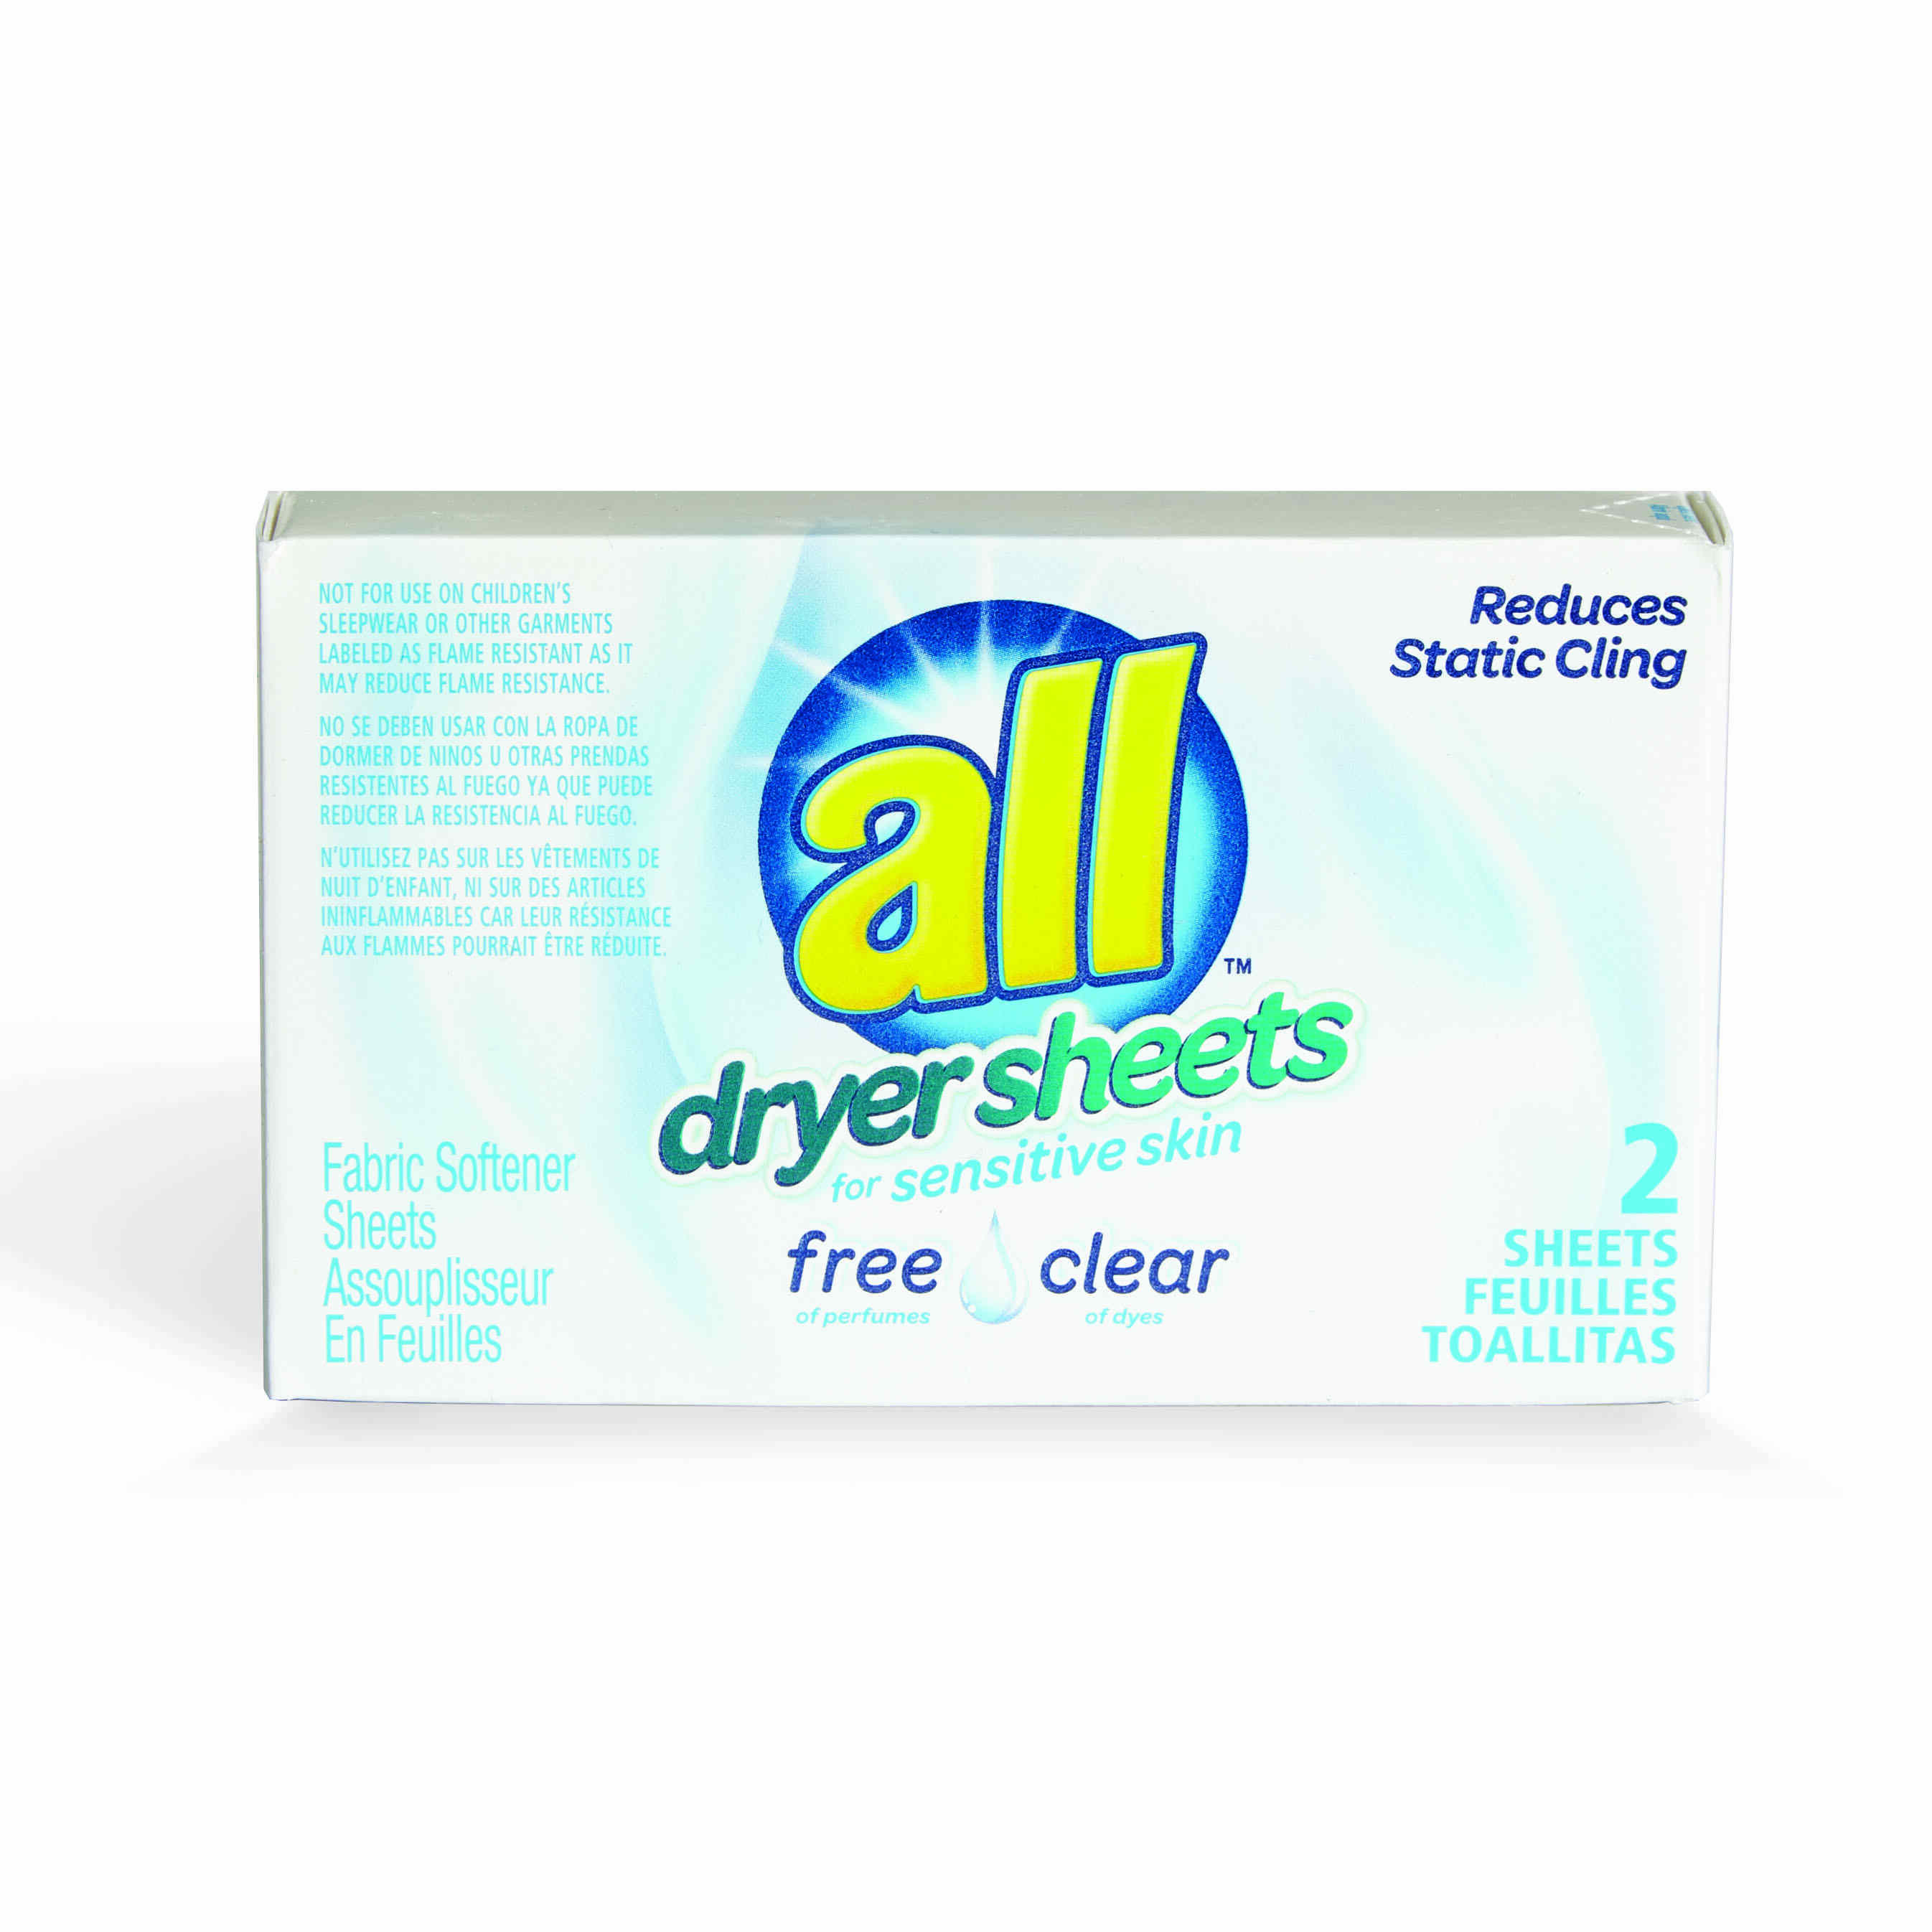 12 Incredible Free And Clear Dryer Sheets For 2023 1693706385 